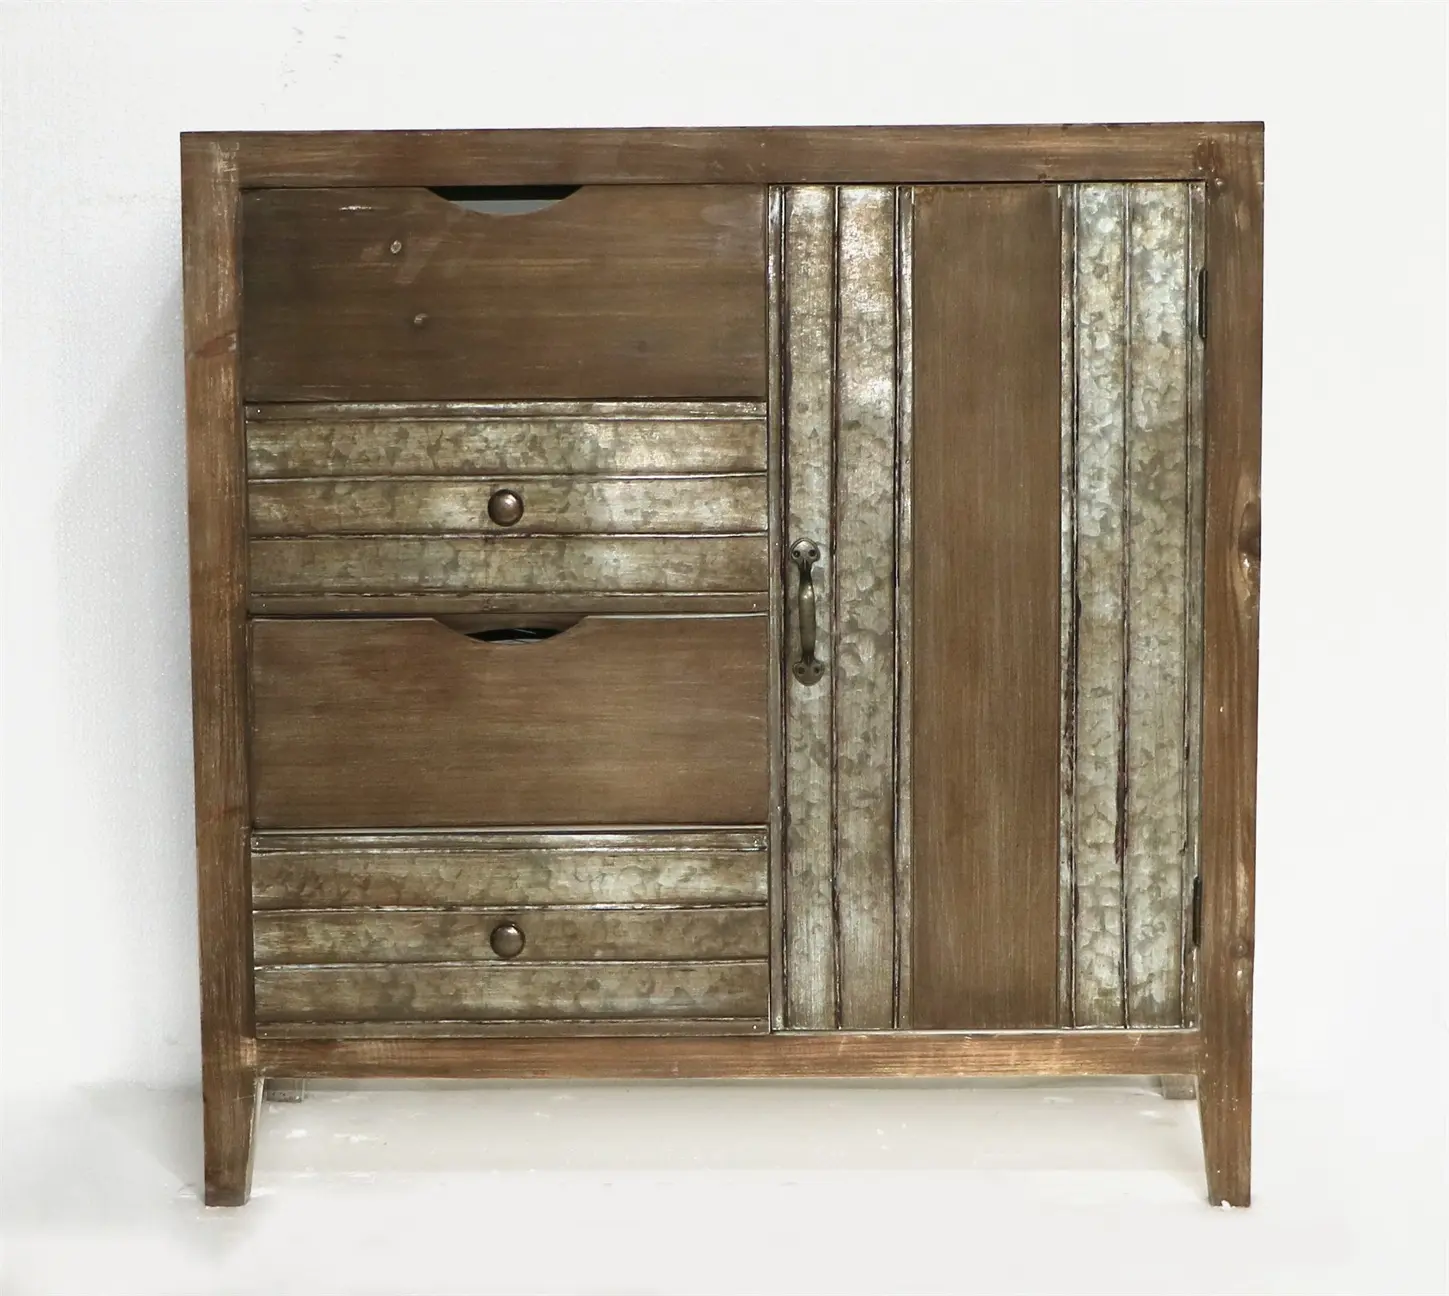 Wholesale Vintage Shabby Chic Reclaimed Home Furniture Used Wooden Storage Cabinet